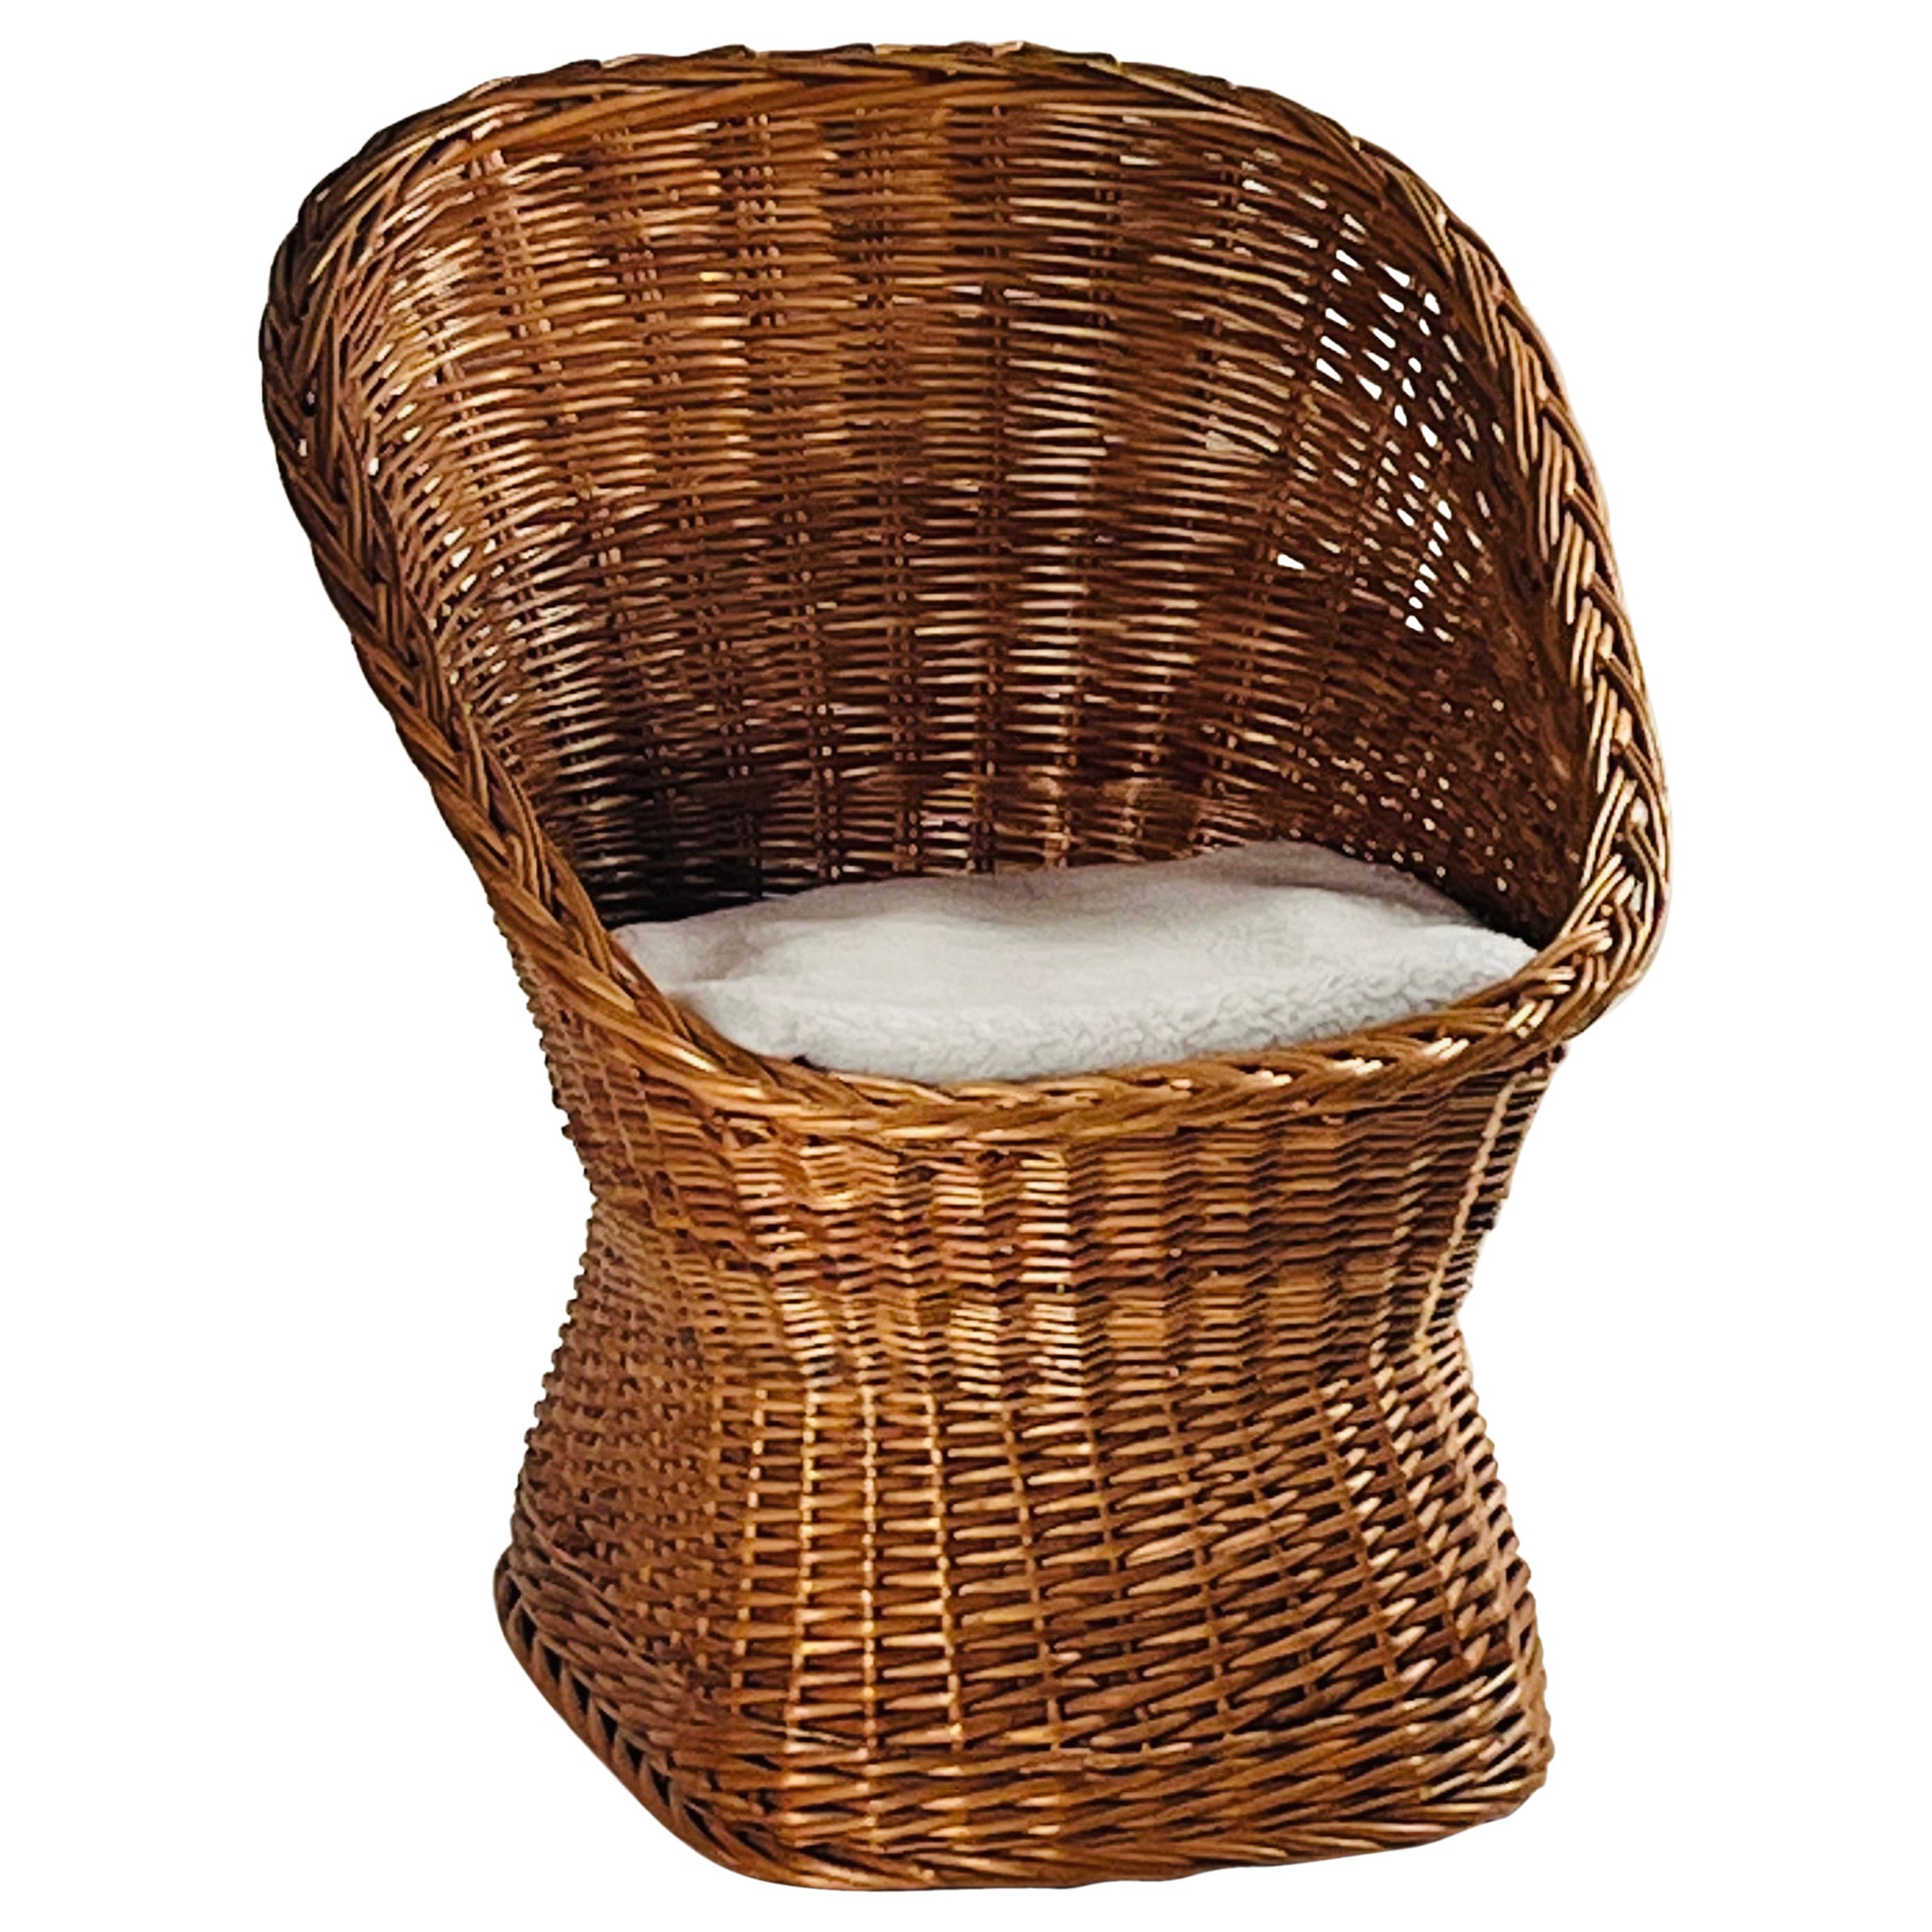 Woven Rattan Wicker Barrel Chair with Shearling Pad